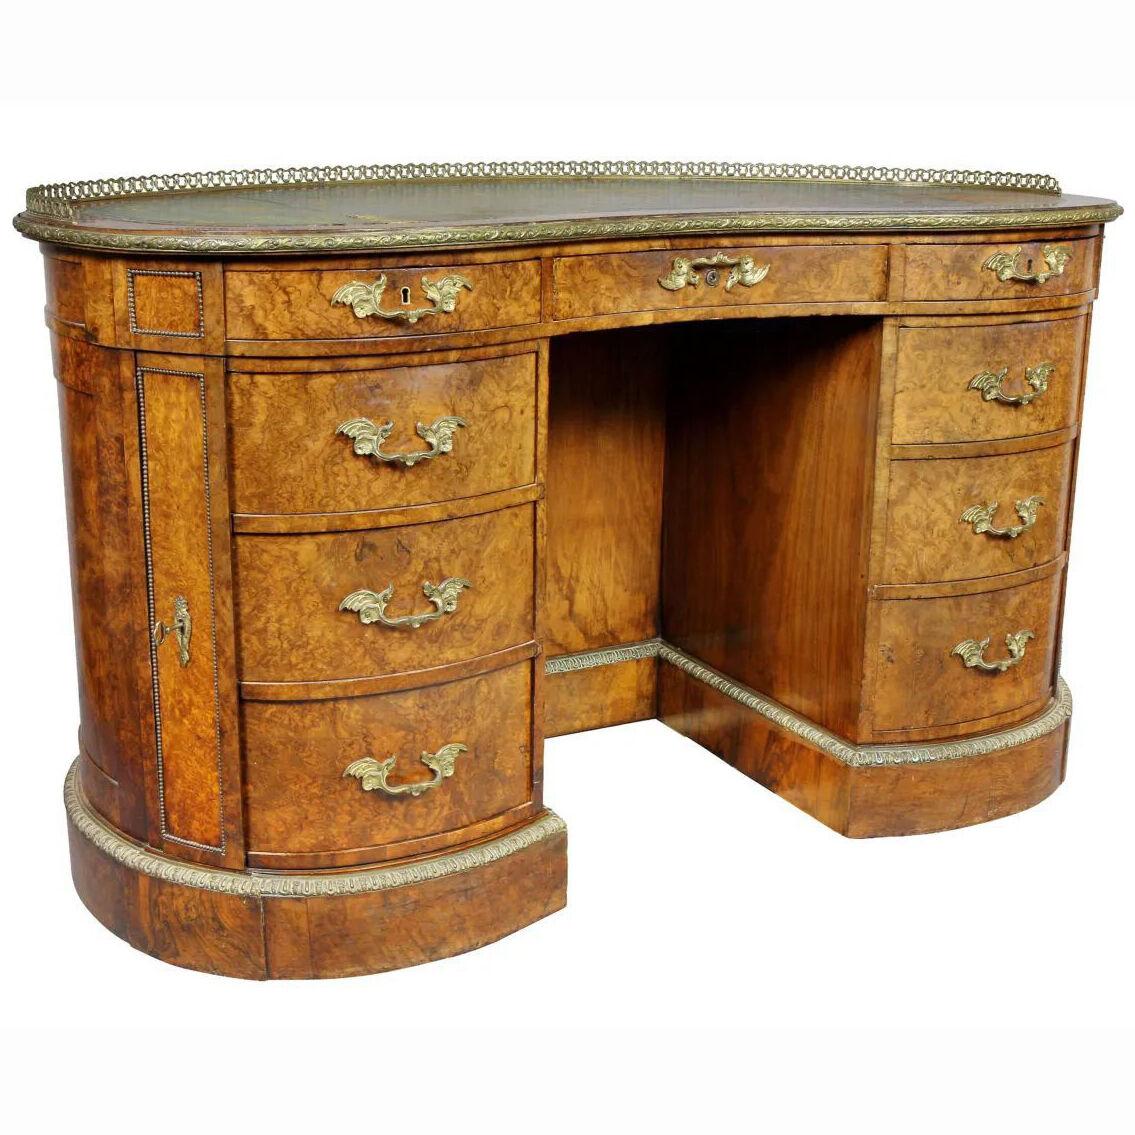 Victorian Burr Walnut and Bronze Mounted Kidney Shaped Desk by Gillows